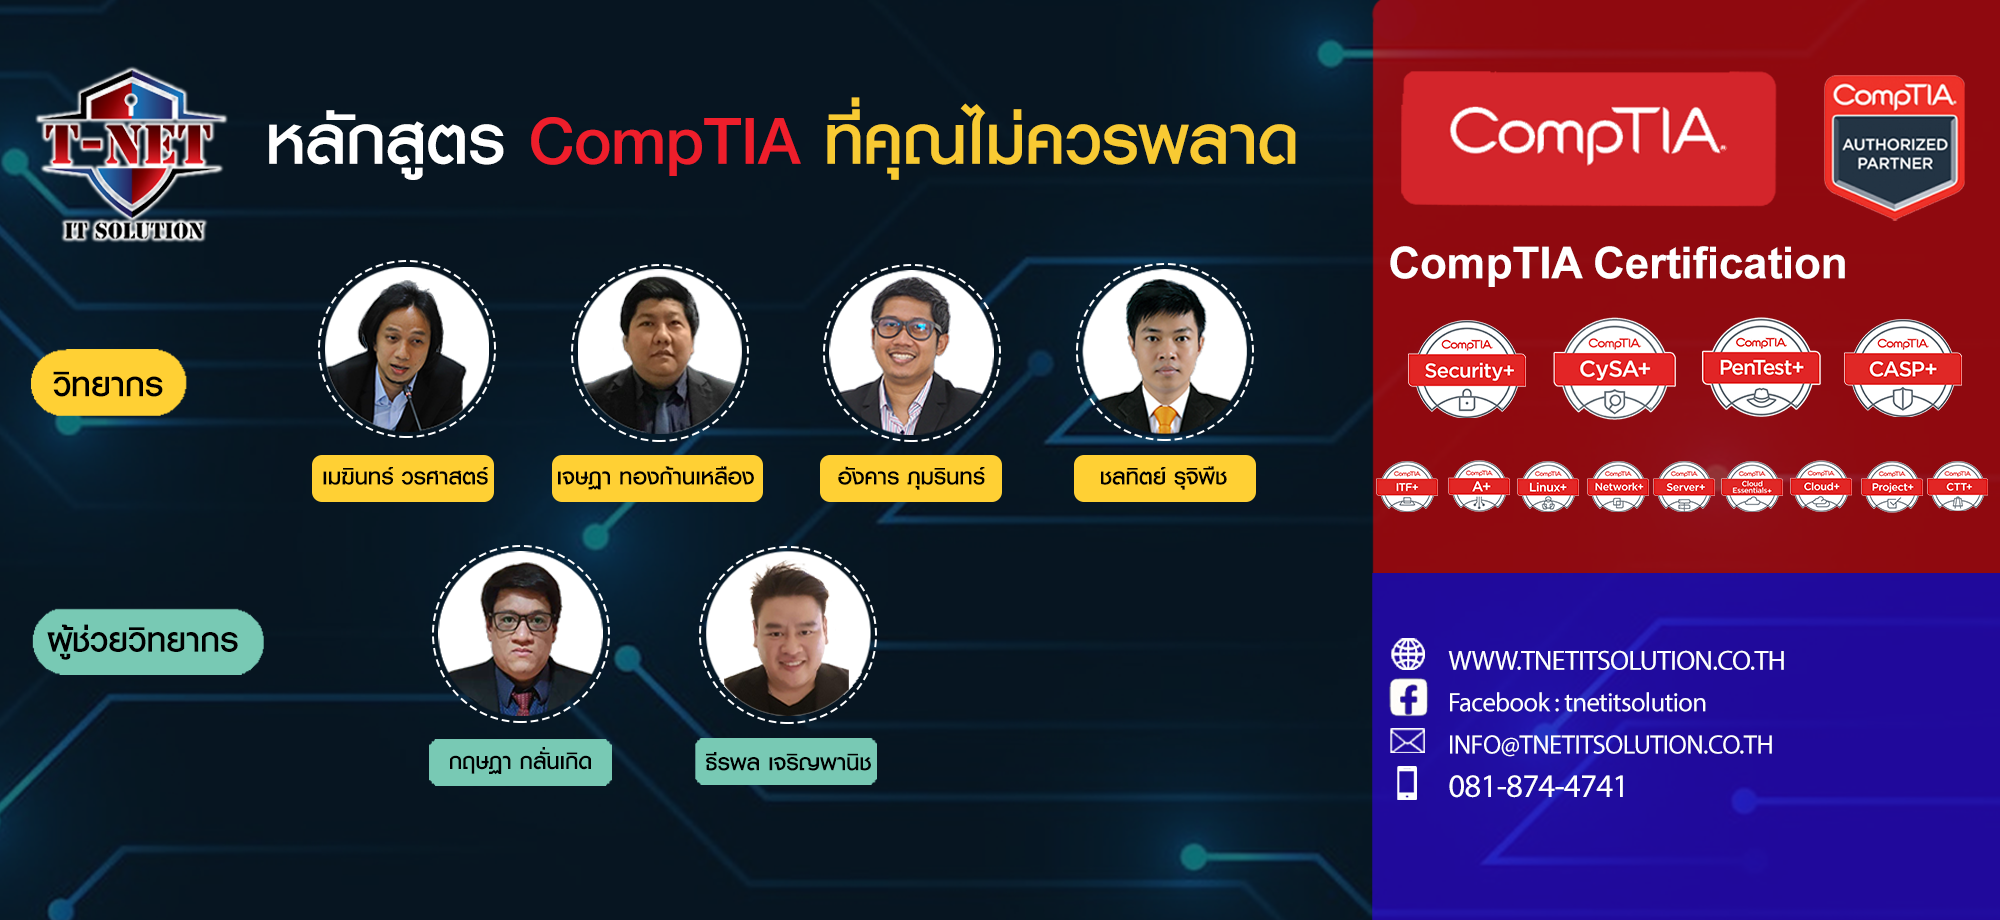 COMPTIA BANNER